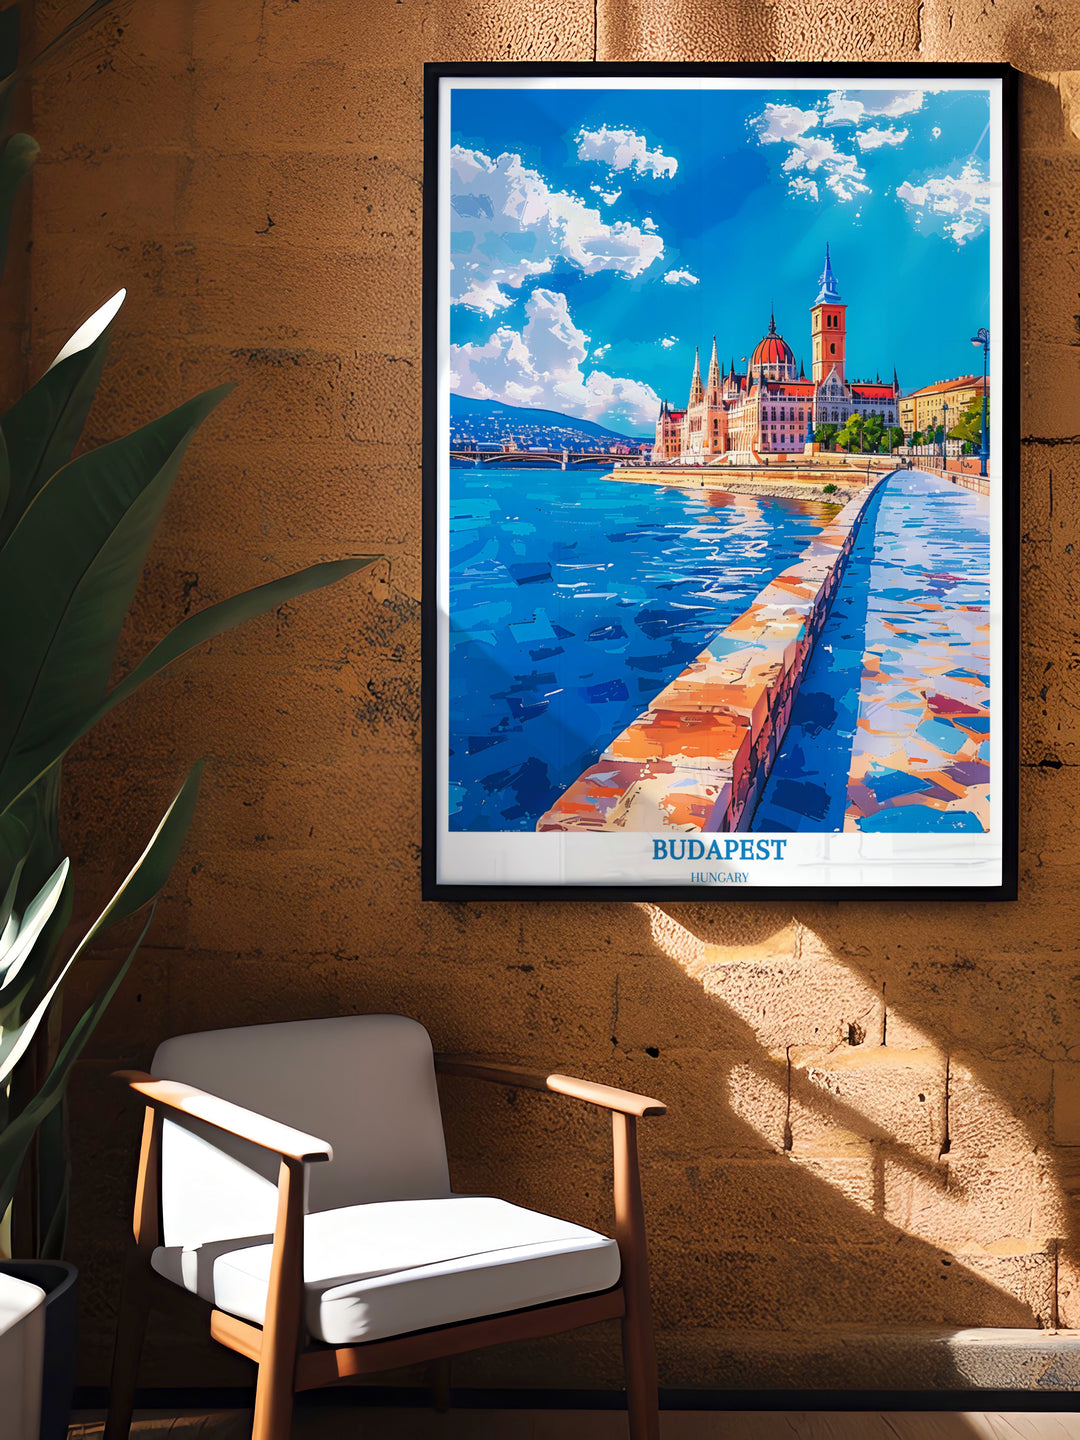 Explore Hungary with Budapest Travel Print - Perfect Gifts for Art Lovers